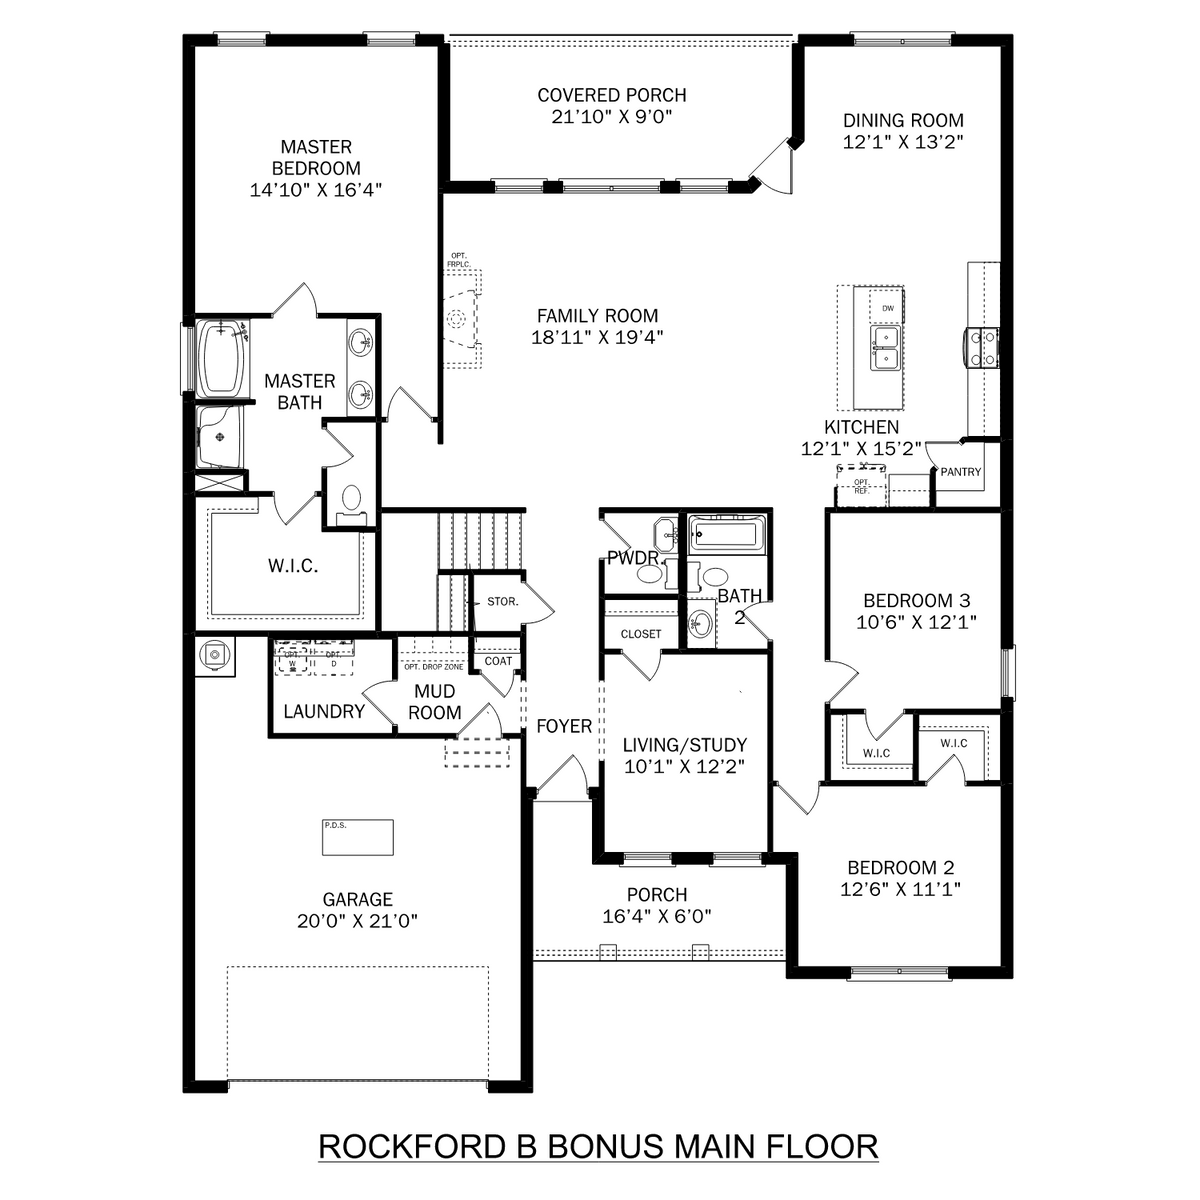 1 - The Rockford B with Bonus floor plan layout for 107 Nellies Way in Davidson Homes' Pikes Ridge community.